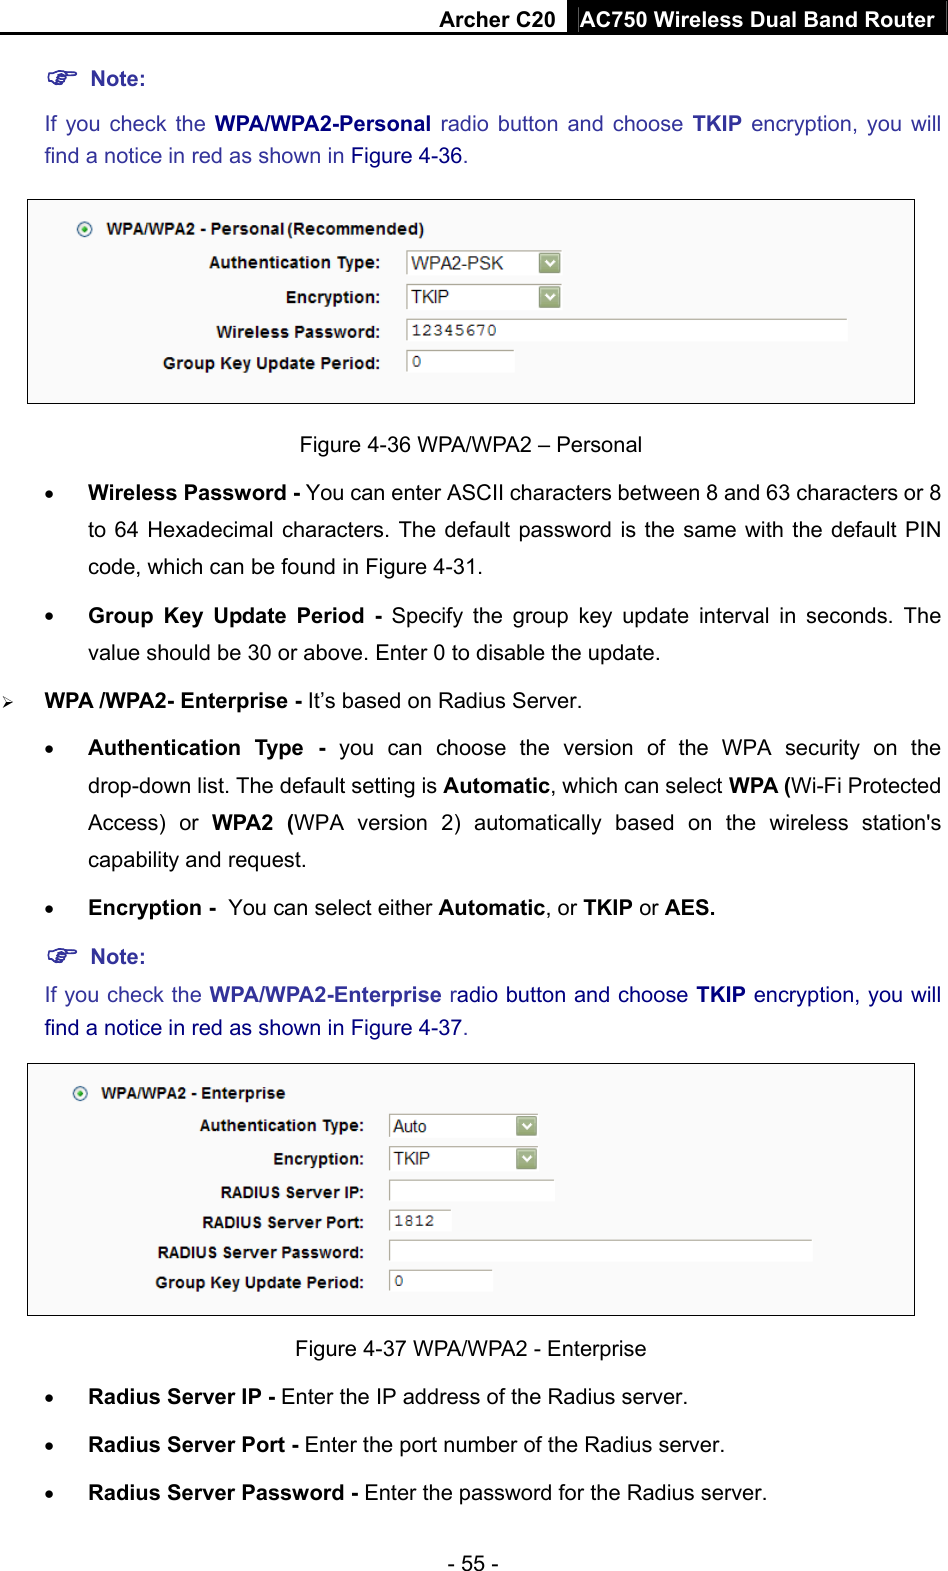 Archer C20 AC750 Wireless Dual Band Router - 55 -  Note:  If you check the WPA/WPA2-Personal radio button and choose TKIP encryption, you will find a notice in red as shown in Figure 4-36.  Figure 4-36 WPA/WPA2 – Personal  Wireless Password - You can enter ASCII characters between 8 and 63 characters or 8 to 64 Hexadecimal characters. The default password is the same with the default PIN code, which can be found in Figure 4-31.  Group Key Update Period - Specify the group key update interval in seconds. The value should be 30 or above. Enter 0 to disable the update.  WPA /WPA2- Enterprise - It’s based on Radius Server.  Authentication Type - you can choose the version of the WPA security on the drop-down list. The default setting is Automatic, which can select WPA (Wi-Fi Protected Access) or WPA2 (WPA version 2) automatically based on the wireless station&apos;s capability and request.  Encryption - You can select either Automatic, or TKIP or AES.  Note: If you check the WPA/WPA2-Enterprise radio button and choose TKIP encryption, you will find a notice in red as shown in Figure 4-37.  Figure 4-37 WPA/WPA2 - Enterprise  Radius Server IP - Enter the IP address of the Radius server.  Radius Server Port - Enter the port number of the Radius server.  Radius Server Password - Enter the password for the Radius server. 